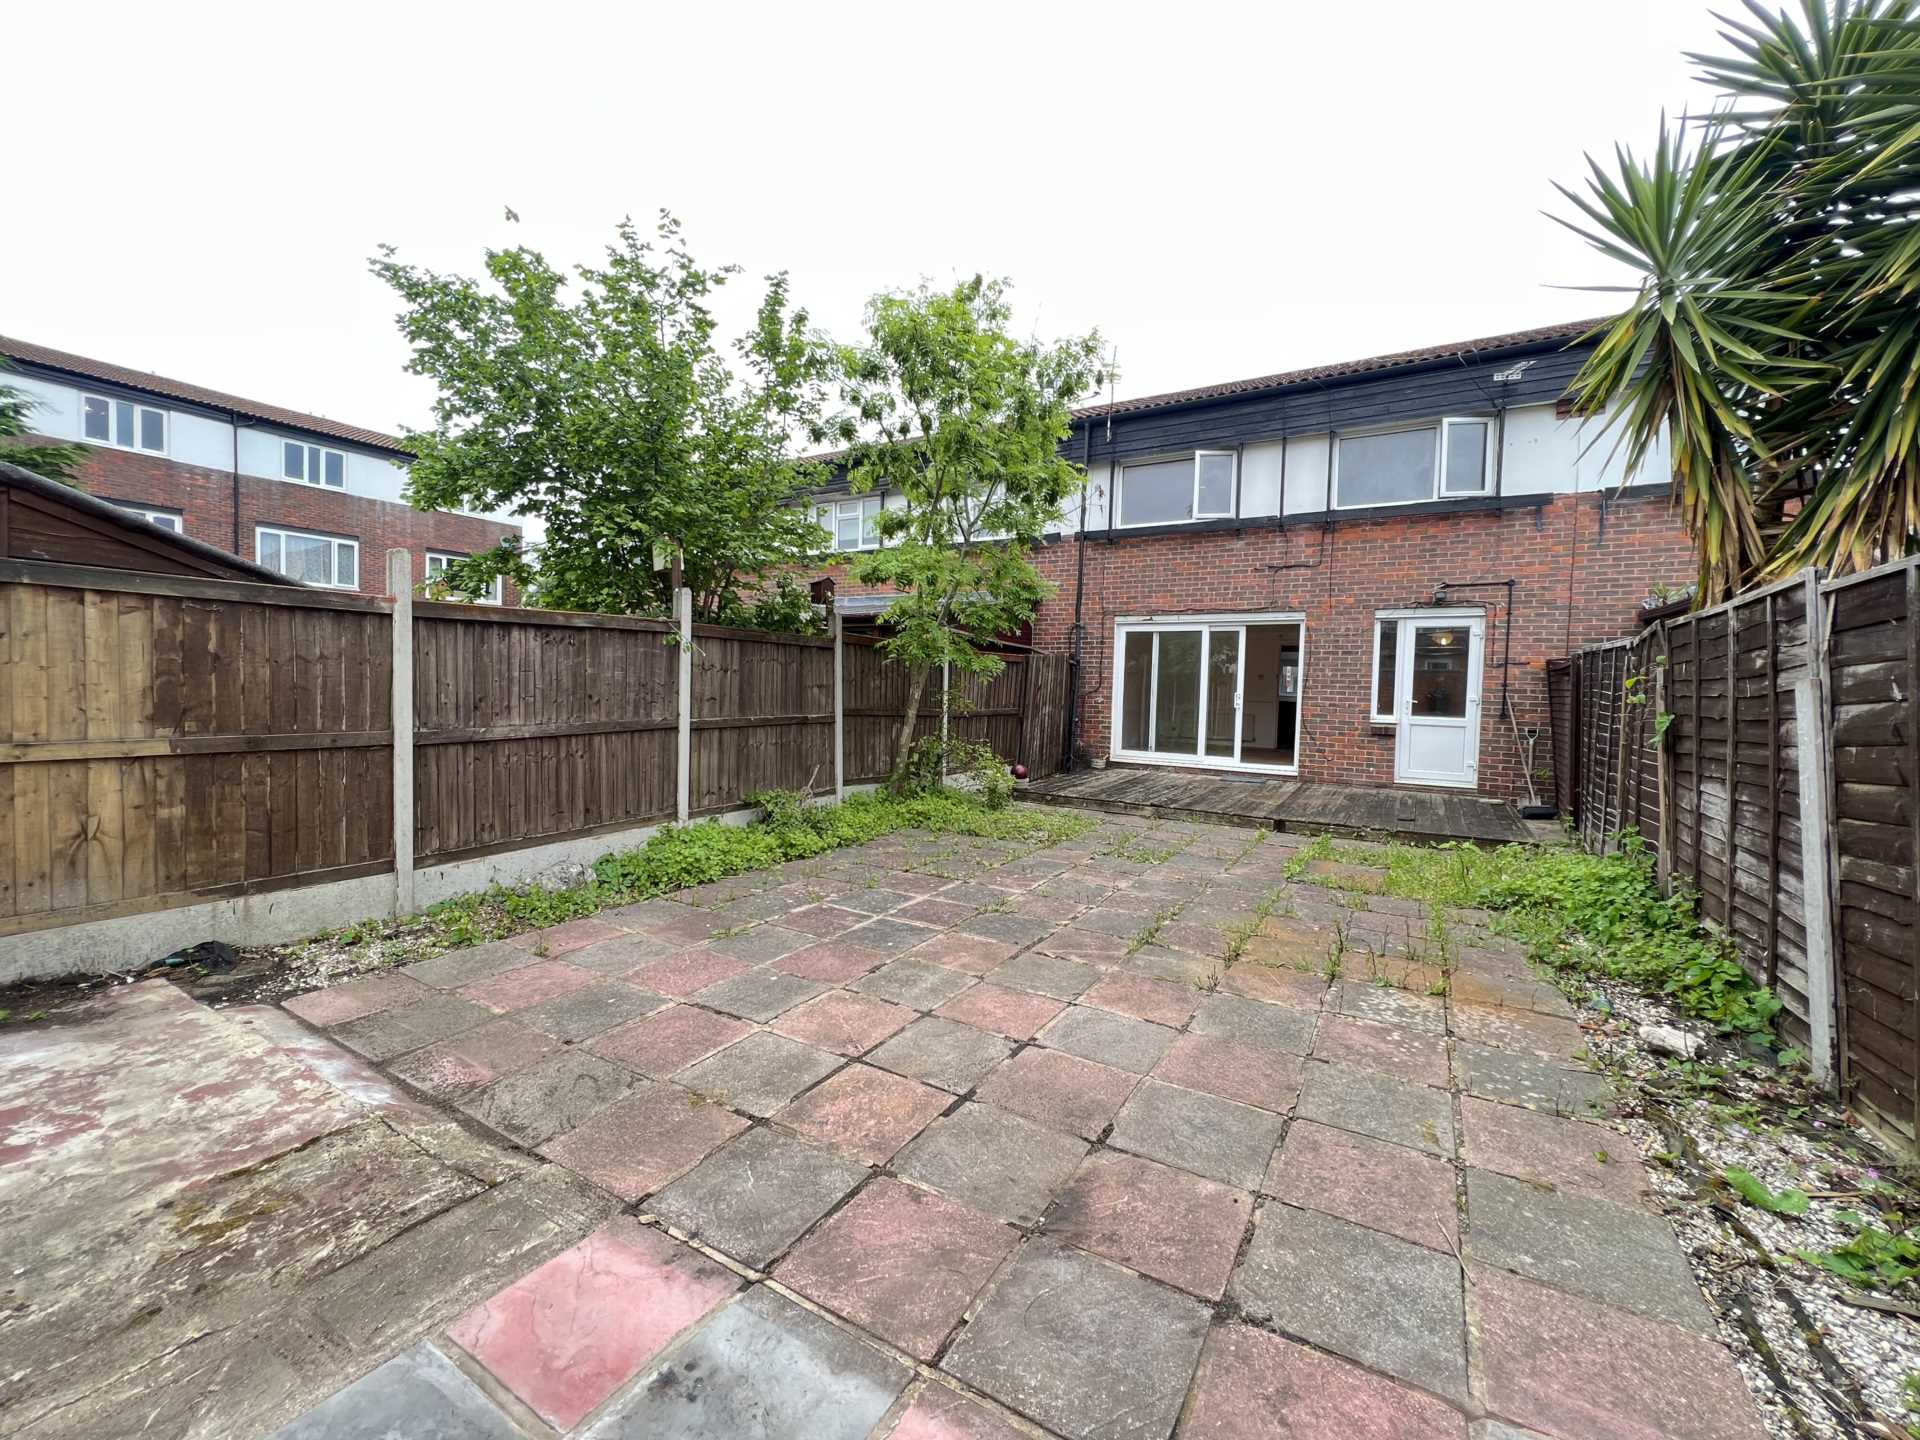 AISHER ROAD SE28 8LH    * VIDEO & 3D FLOORPLAN AVAILABLE *, Image 12